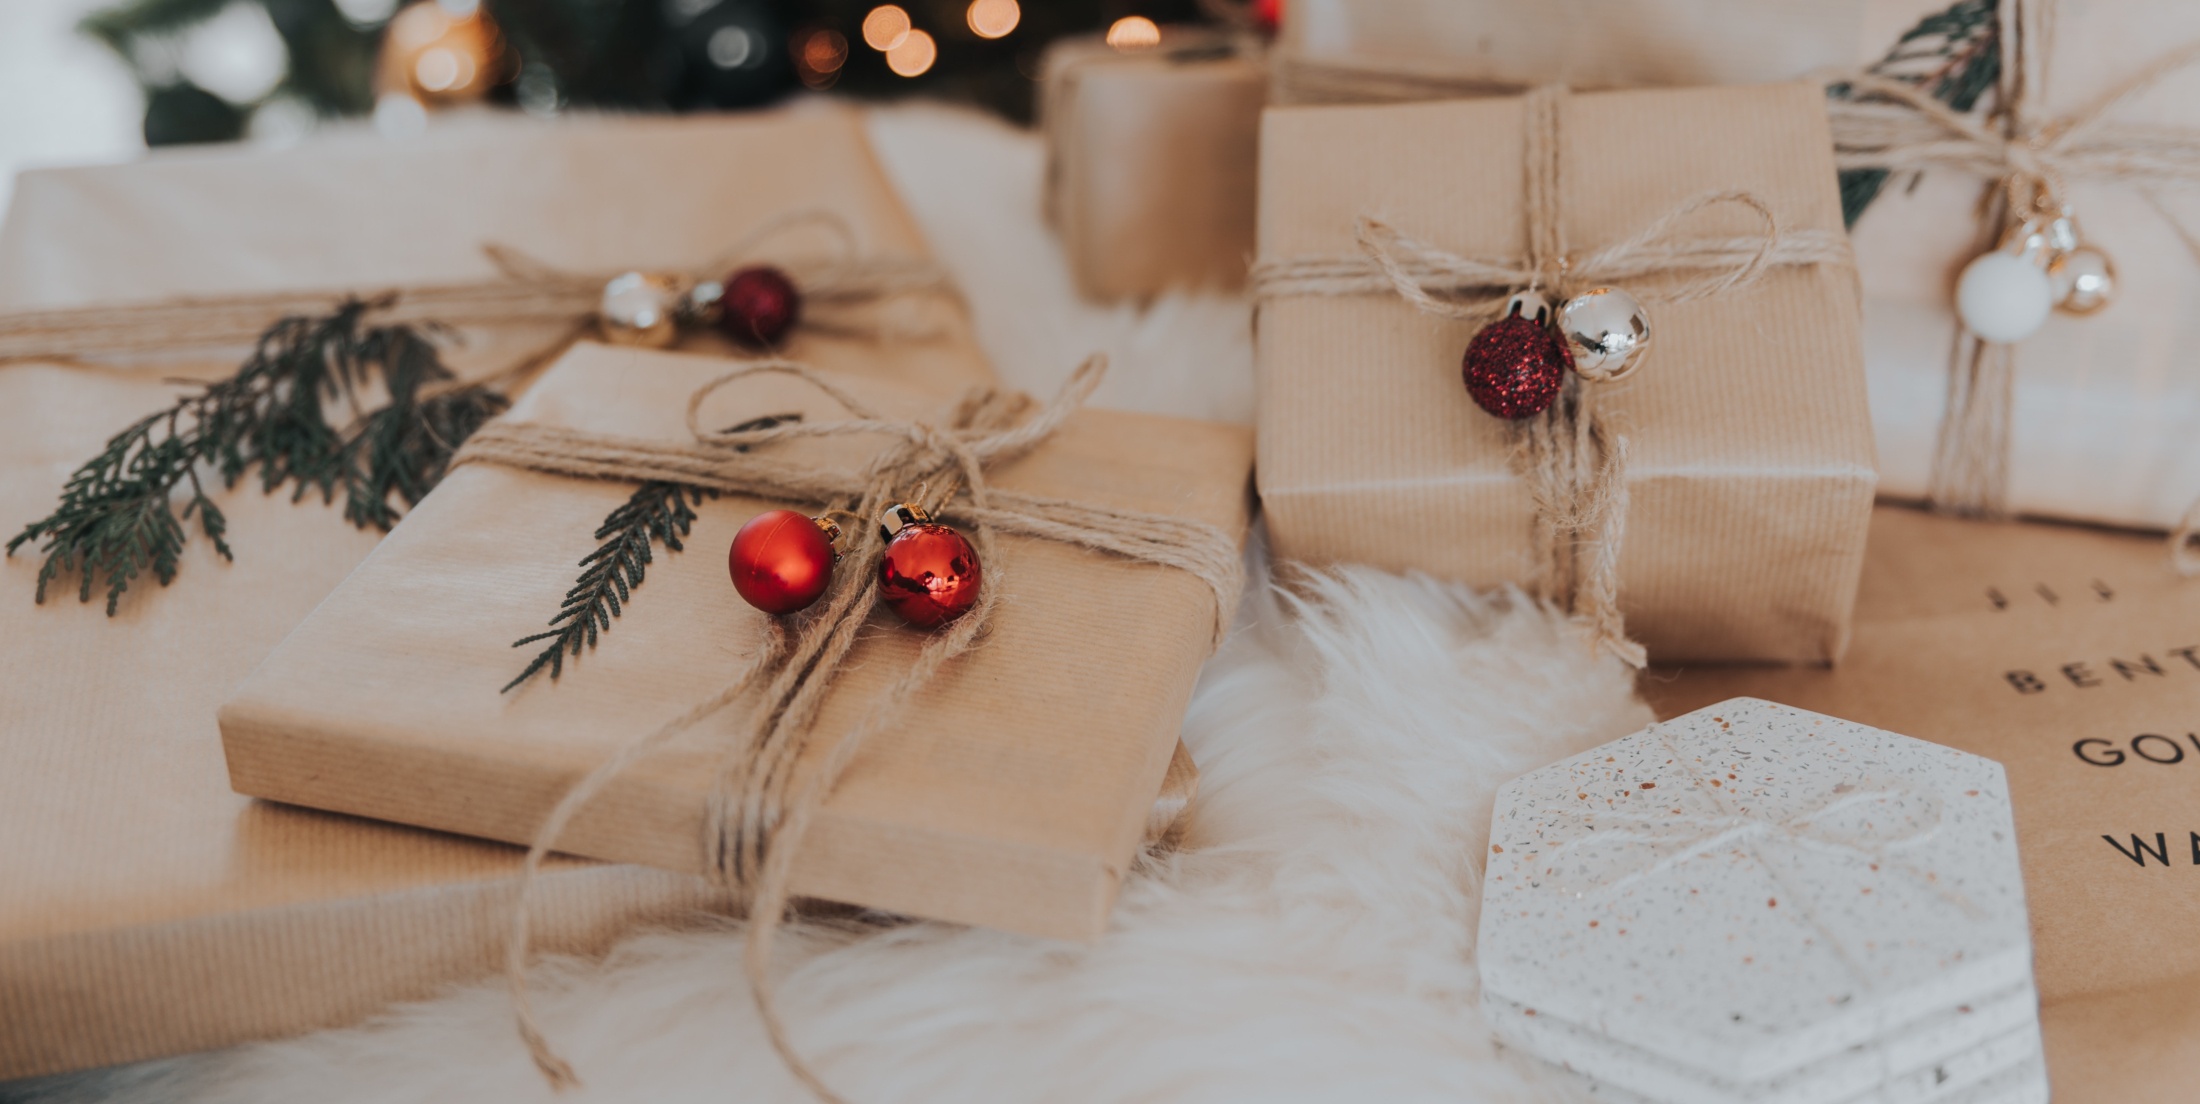 Christmas gift ideas for students who want to learn English